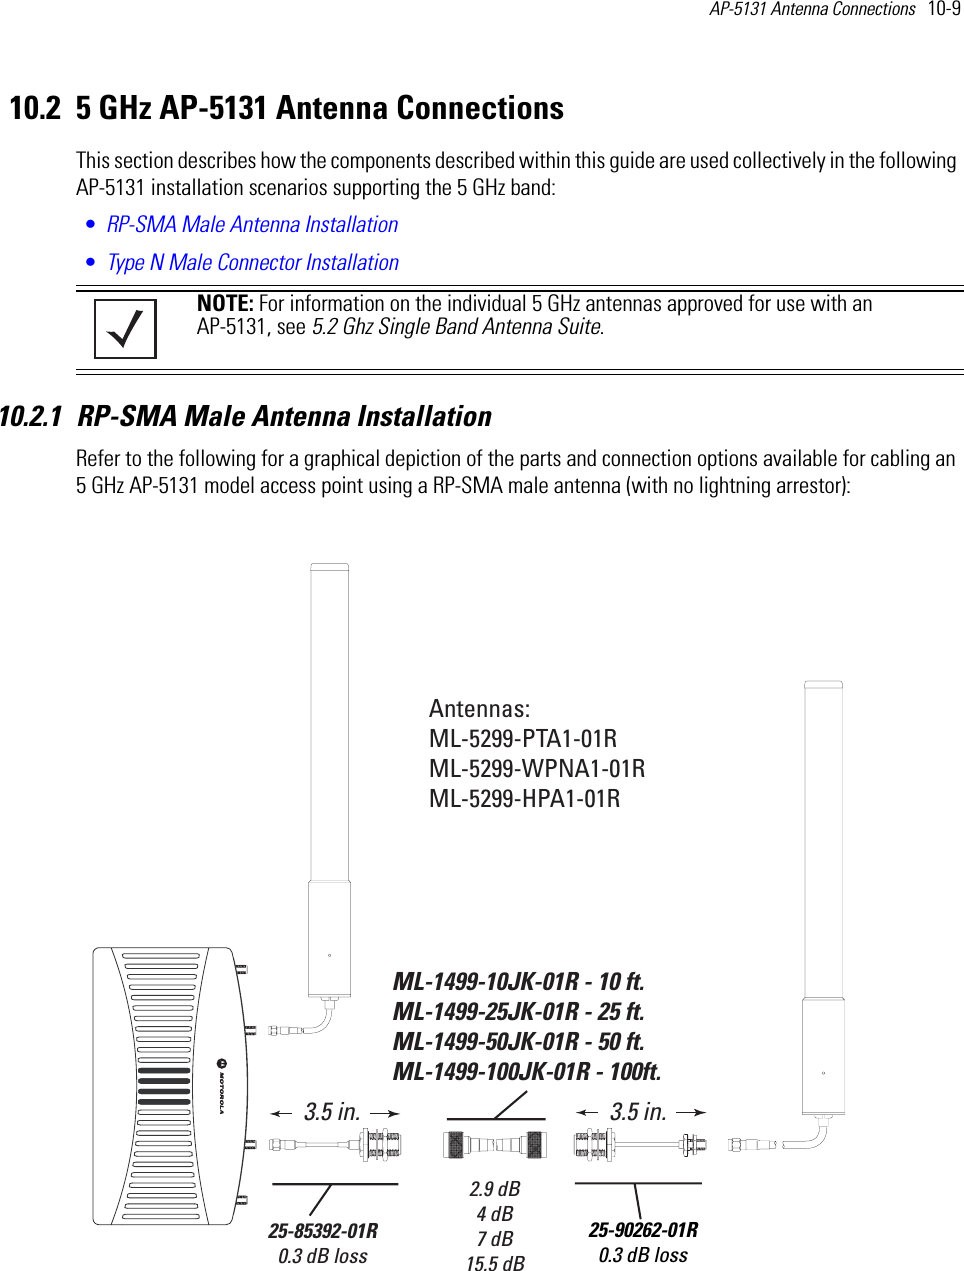 AP-5131 Antenna Connections   10-9 10.2 5 GHz AP-5131 Antenna ConnectionsThis section describes how the components described within this guide are used collectively in the following AP-5131 installation scenarios supporting the 5 GHz band:•RP-SMA Male Antenna Installation•Type N Male Connector Installation 10.2.1 RP-SMA Male Antenna Installation Refer to the following for a graphical depiction of the parts and connection options available for cabling an 5 GHz AP-5131 model access point using a RP-SMA male antenna (with no lightning arrestor): NOTE: For information on the individual 5 GHz antennas approved for use with an AP-5131, see 5.2 Ghz Single Band Antenna Suite.Antennas:ML-5299-PTA1-01RML-5299-WPNA1-01RML-5299-HPA1-01RML-1499-10JK-01R - 10 ft.ML-1499-25JK-01R - 25 ft.ML-1499-50JK-01R - 50 ft.ML-1499-100JK-01R - 100ft. 2.9 dB4 dB7 dB15.5 dB25-90262-01R0.3 dB loss3.5 in.25-85392-01R0.3 dB loss3.5 in.